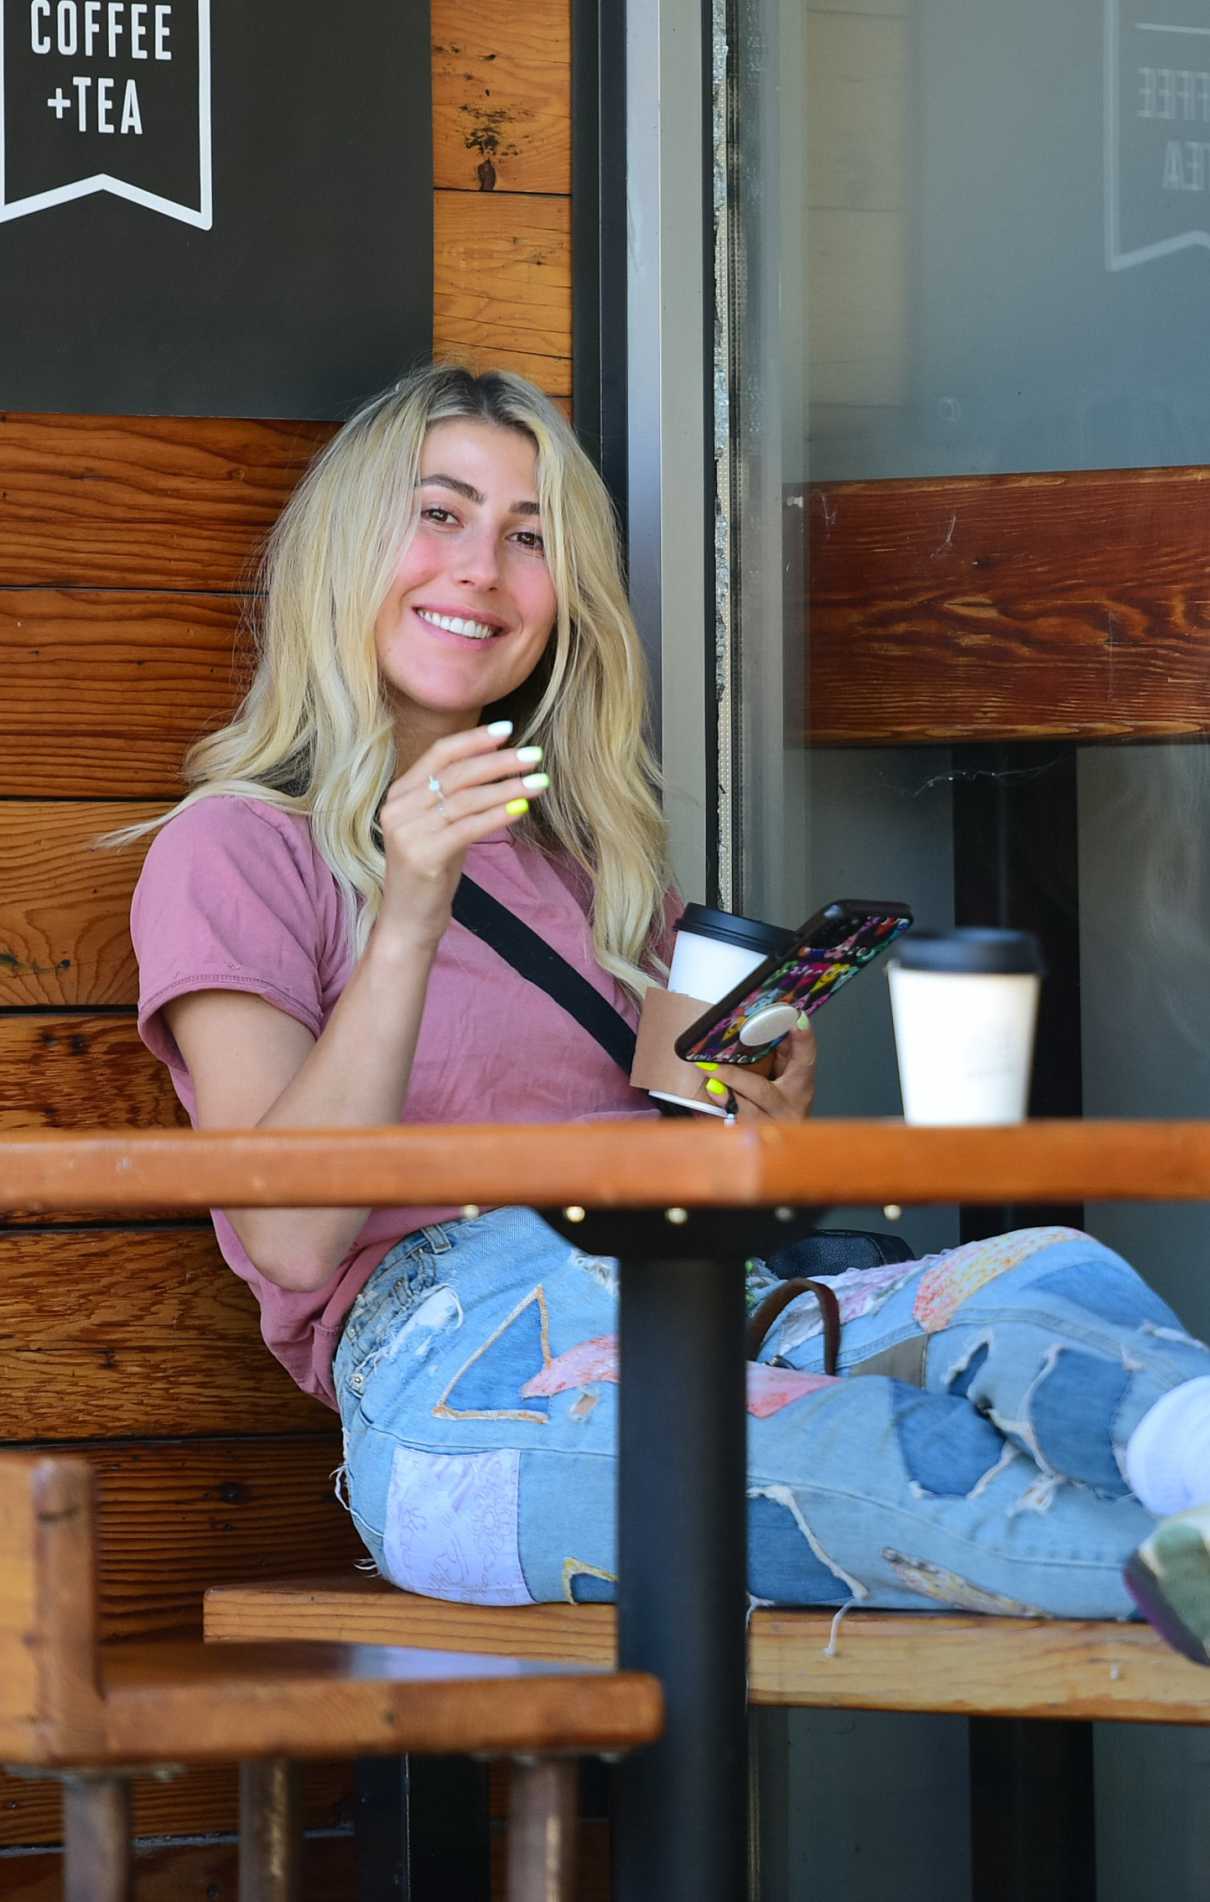 Emma Slater in a Ripped Jeans